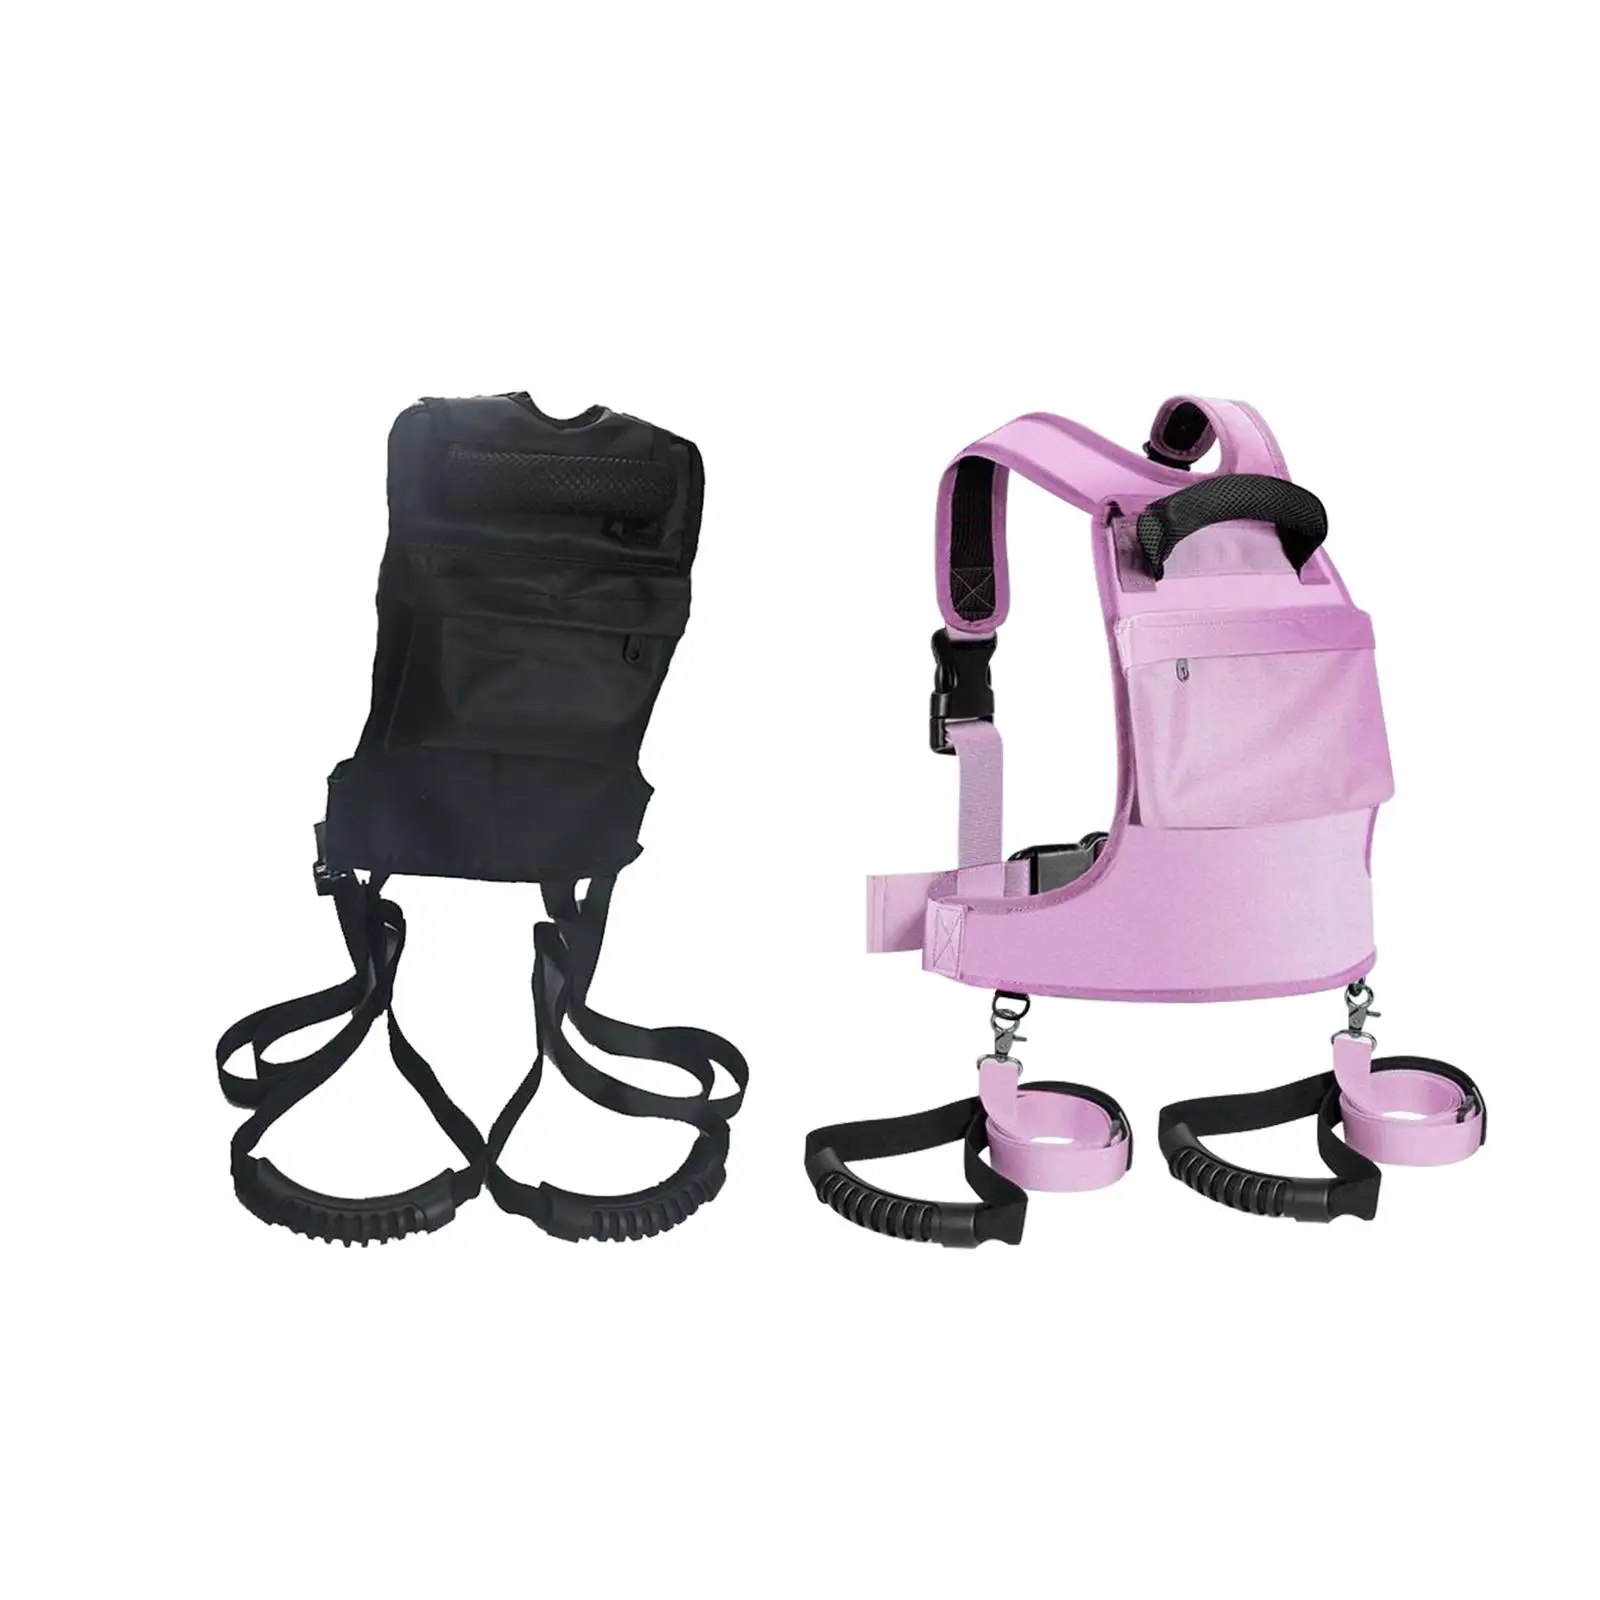 Kids Ski and Snowboard Harness with Removable Leash Learning to Ski Safely Ski